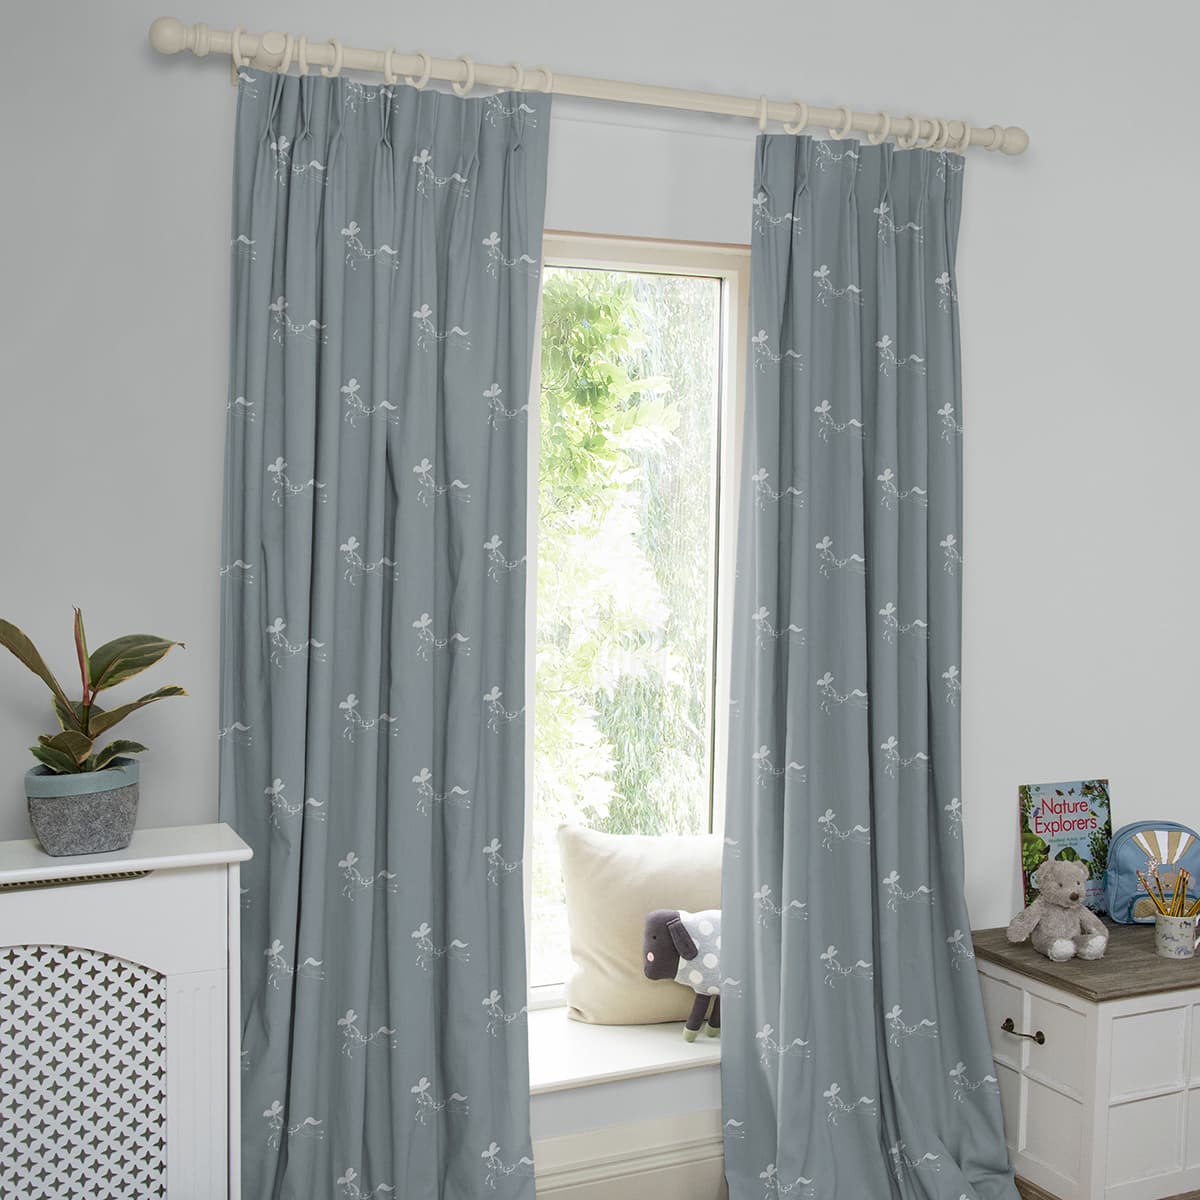 Fairground Ponies Teal Made to Measure Curtains